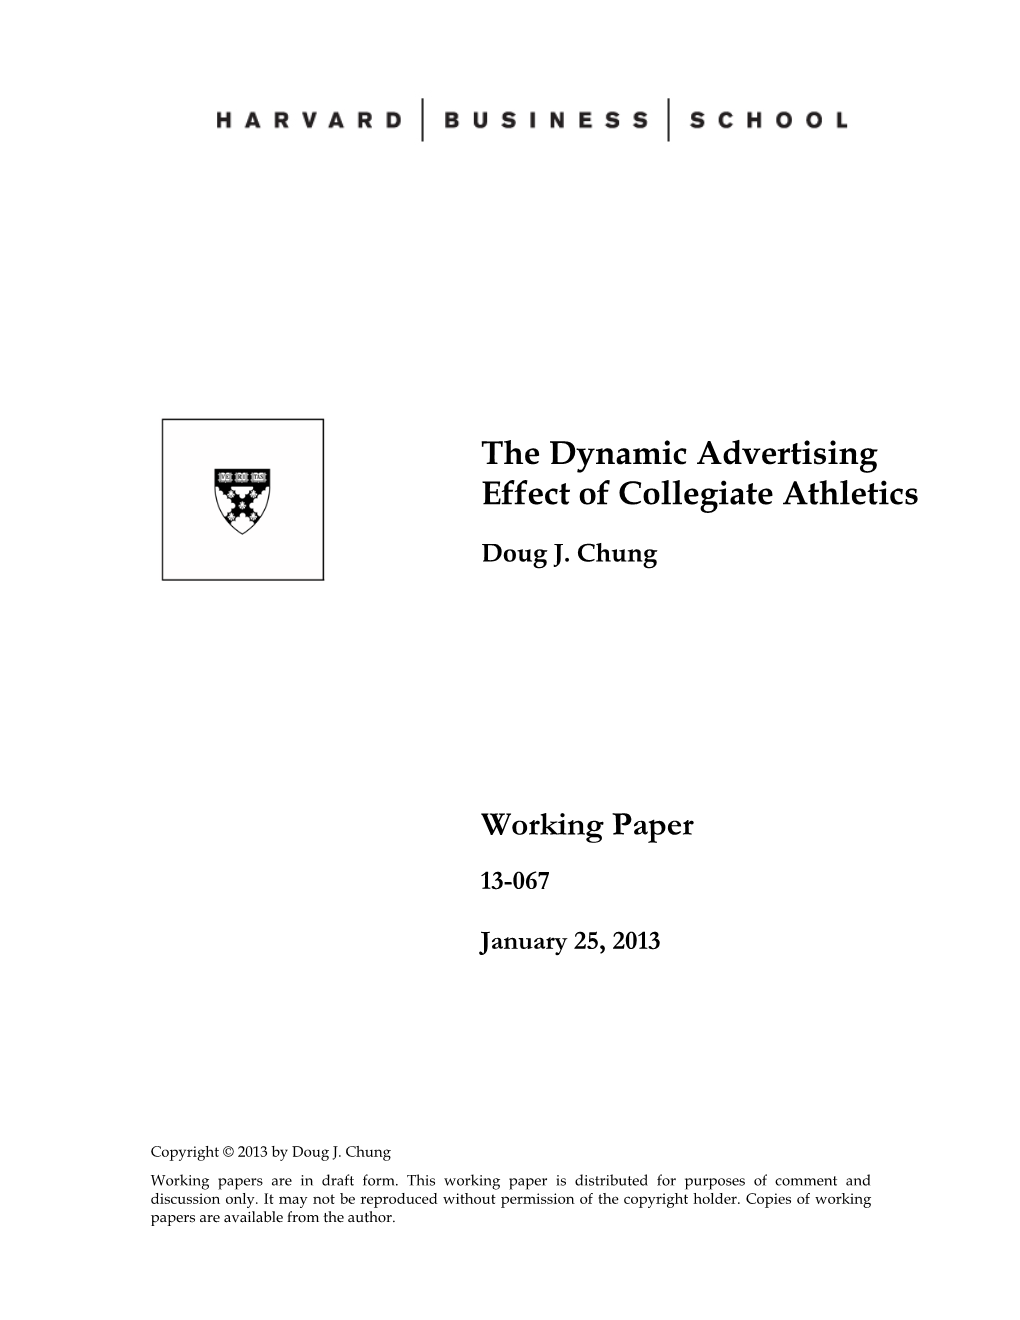 The Dynamic Advertising Effect of Collegiate Athletics Working Paper